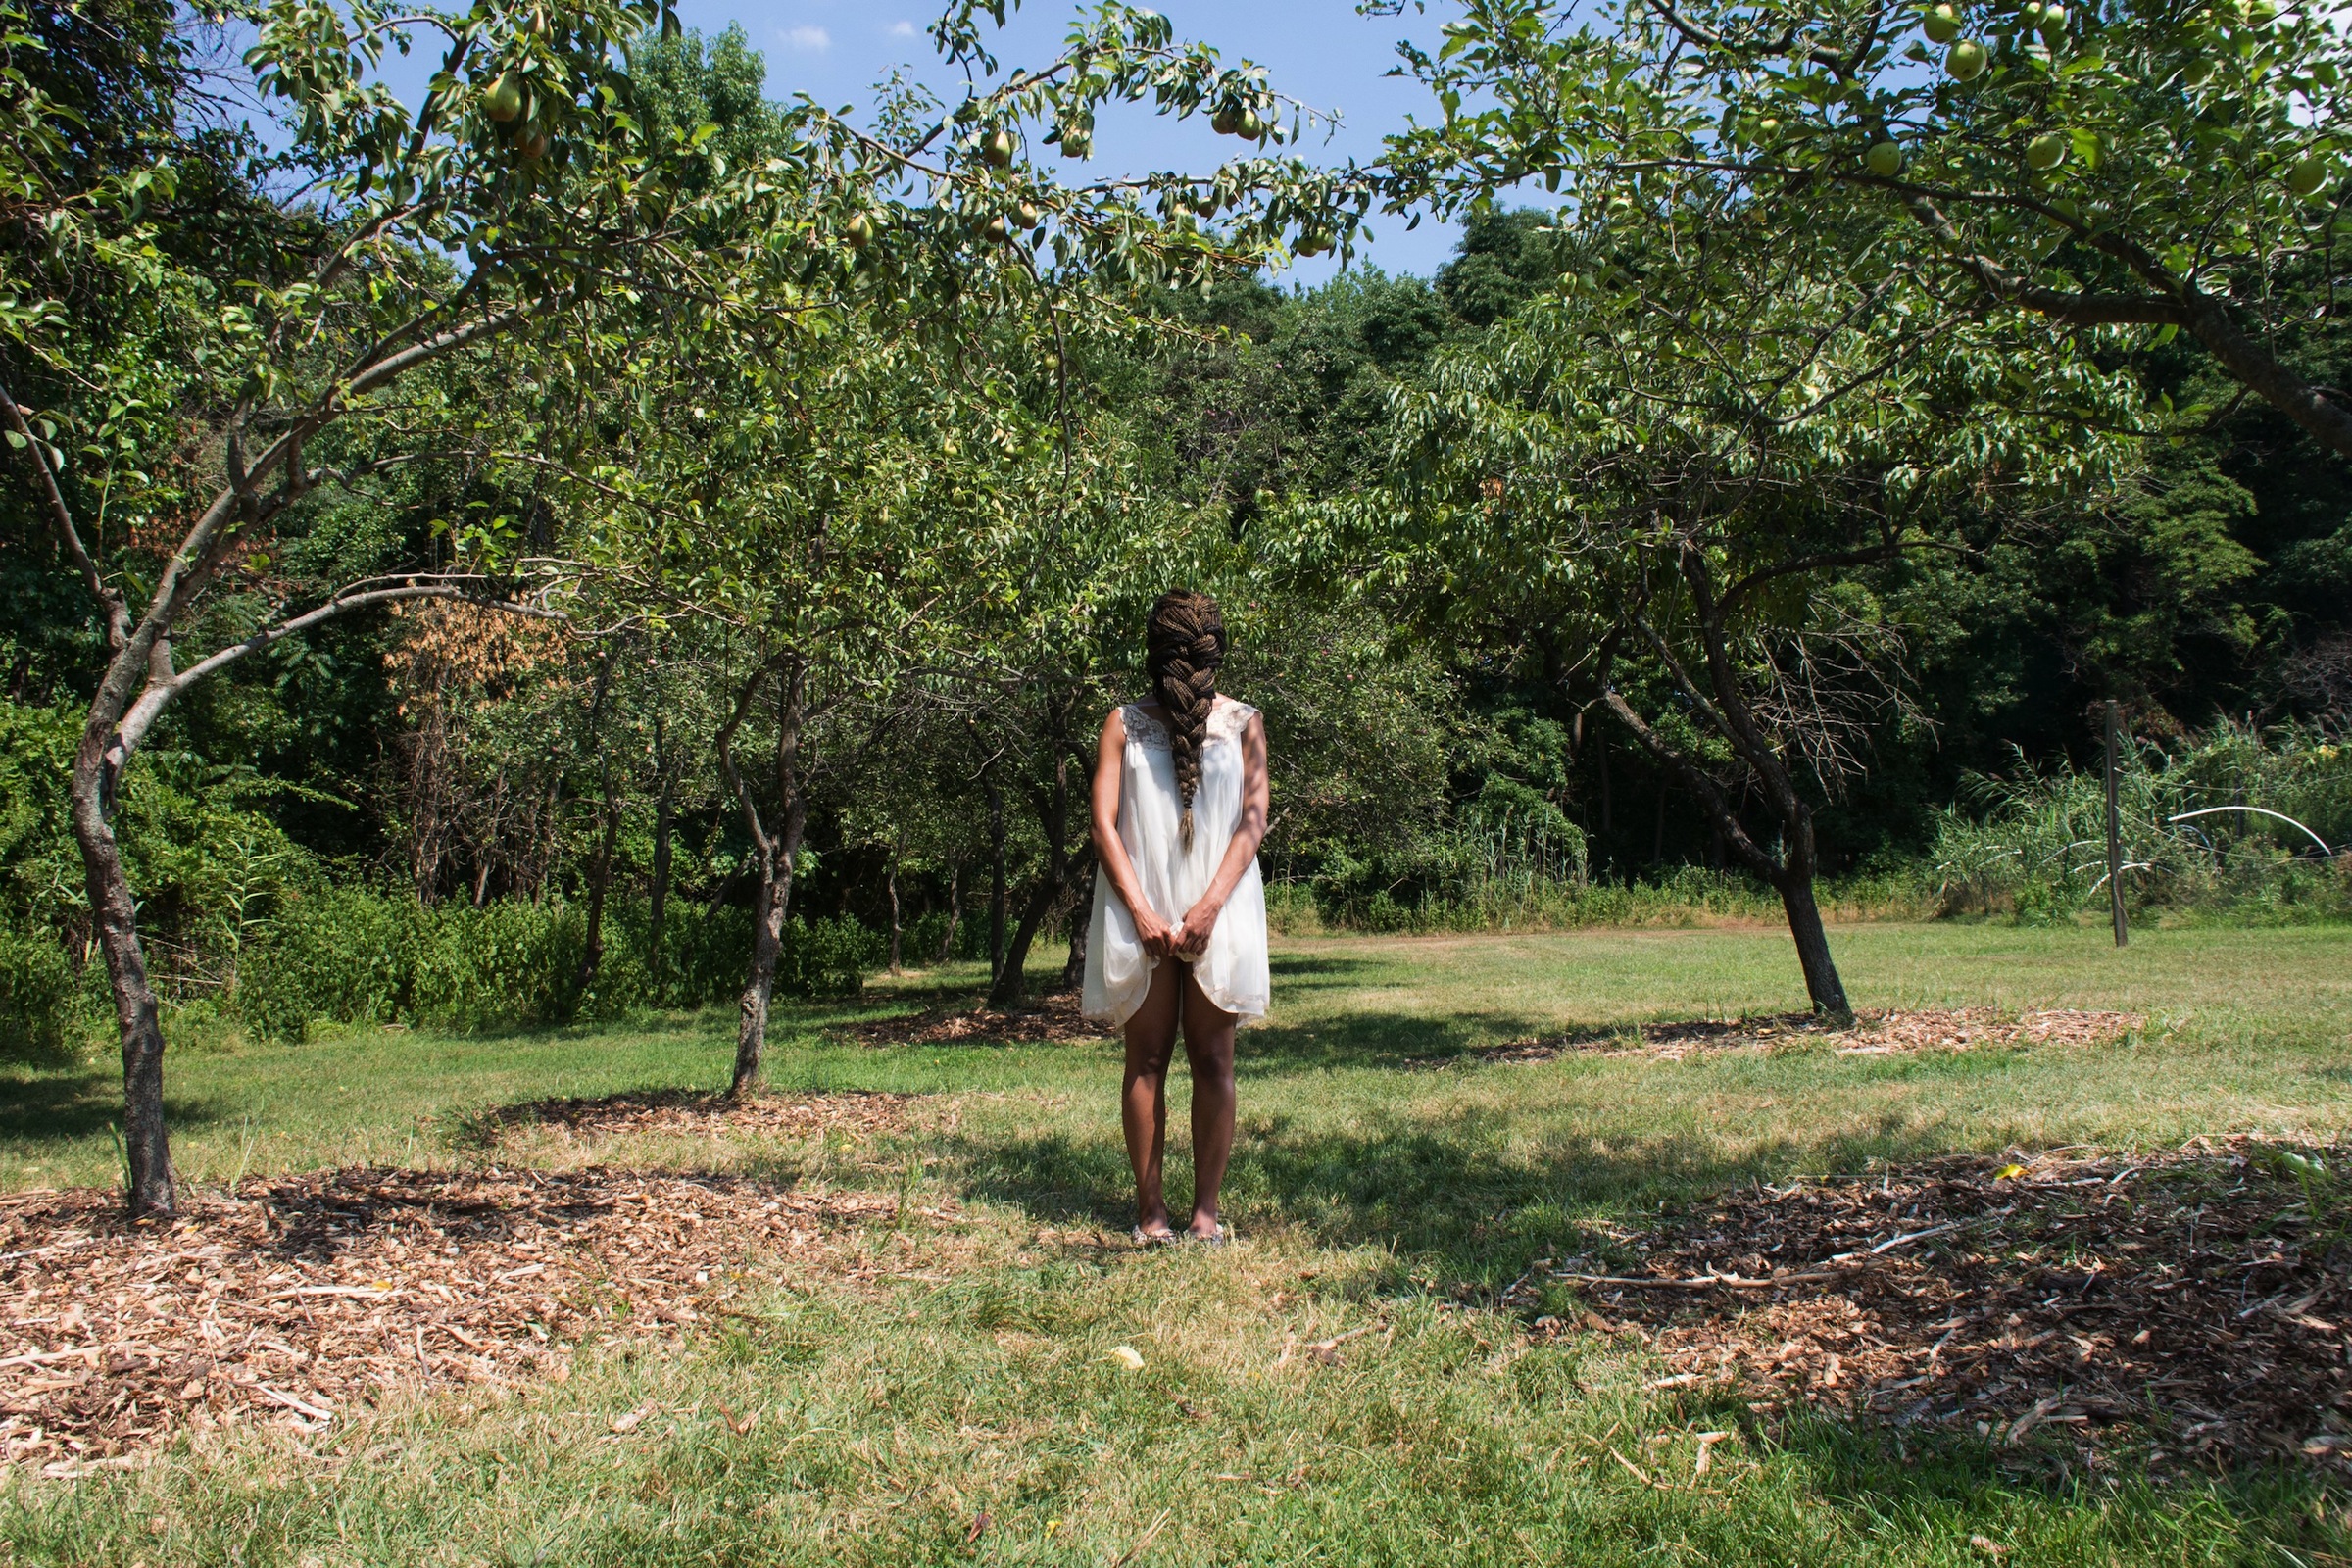 Dollbaby standing in the orchard at midday., 2015